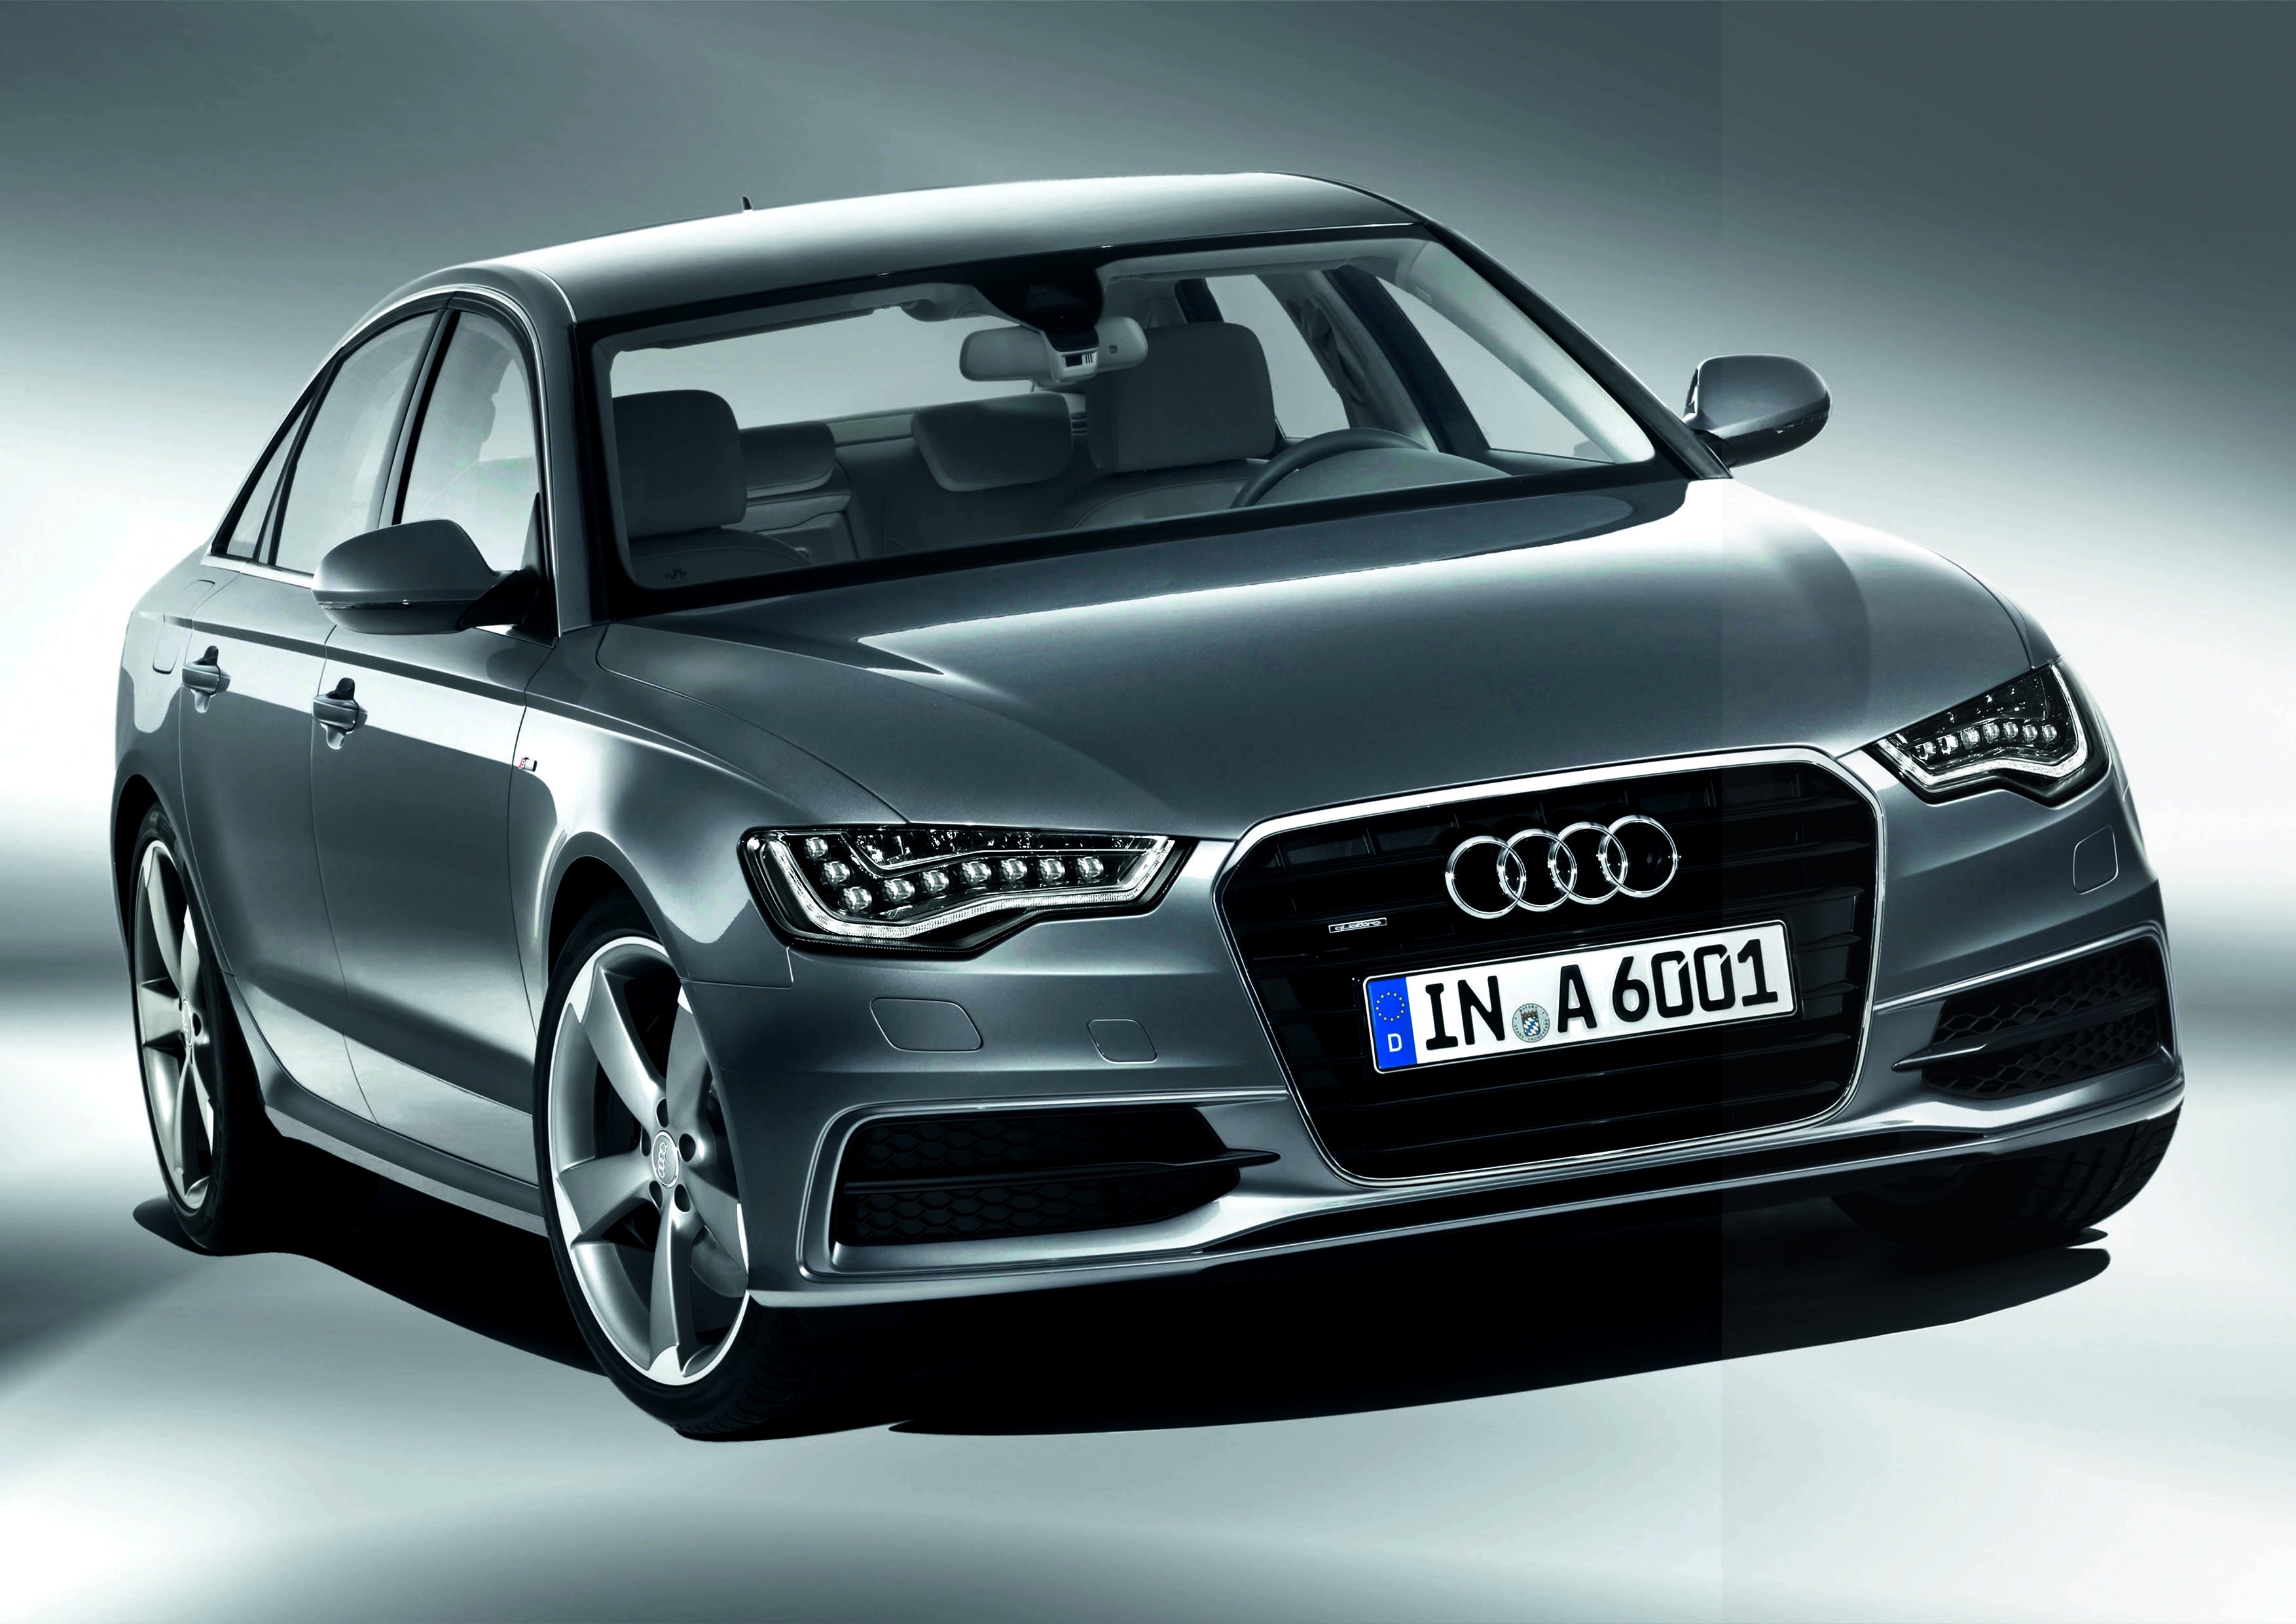 Audi A6 Wallpapers HD Download